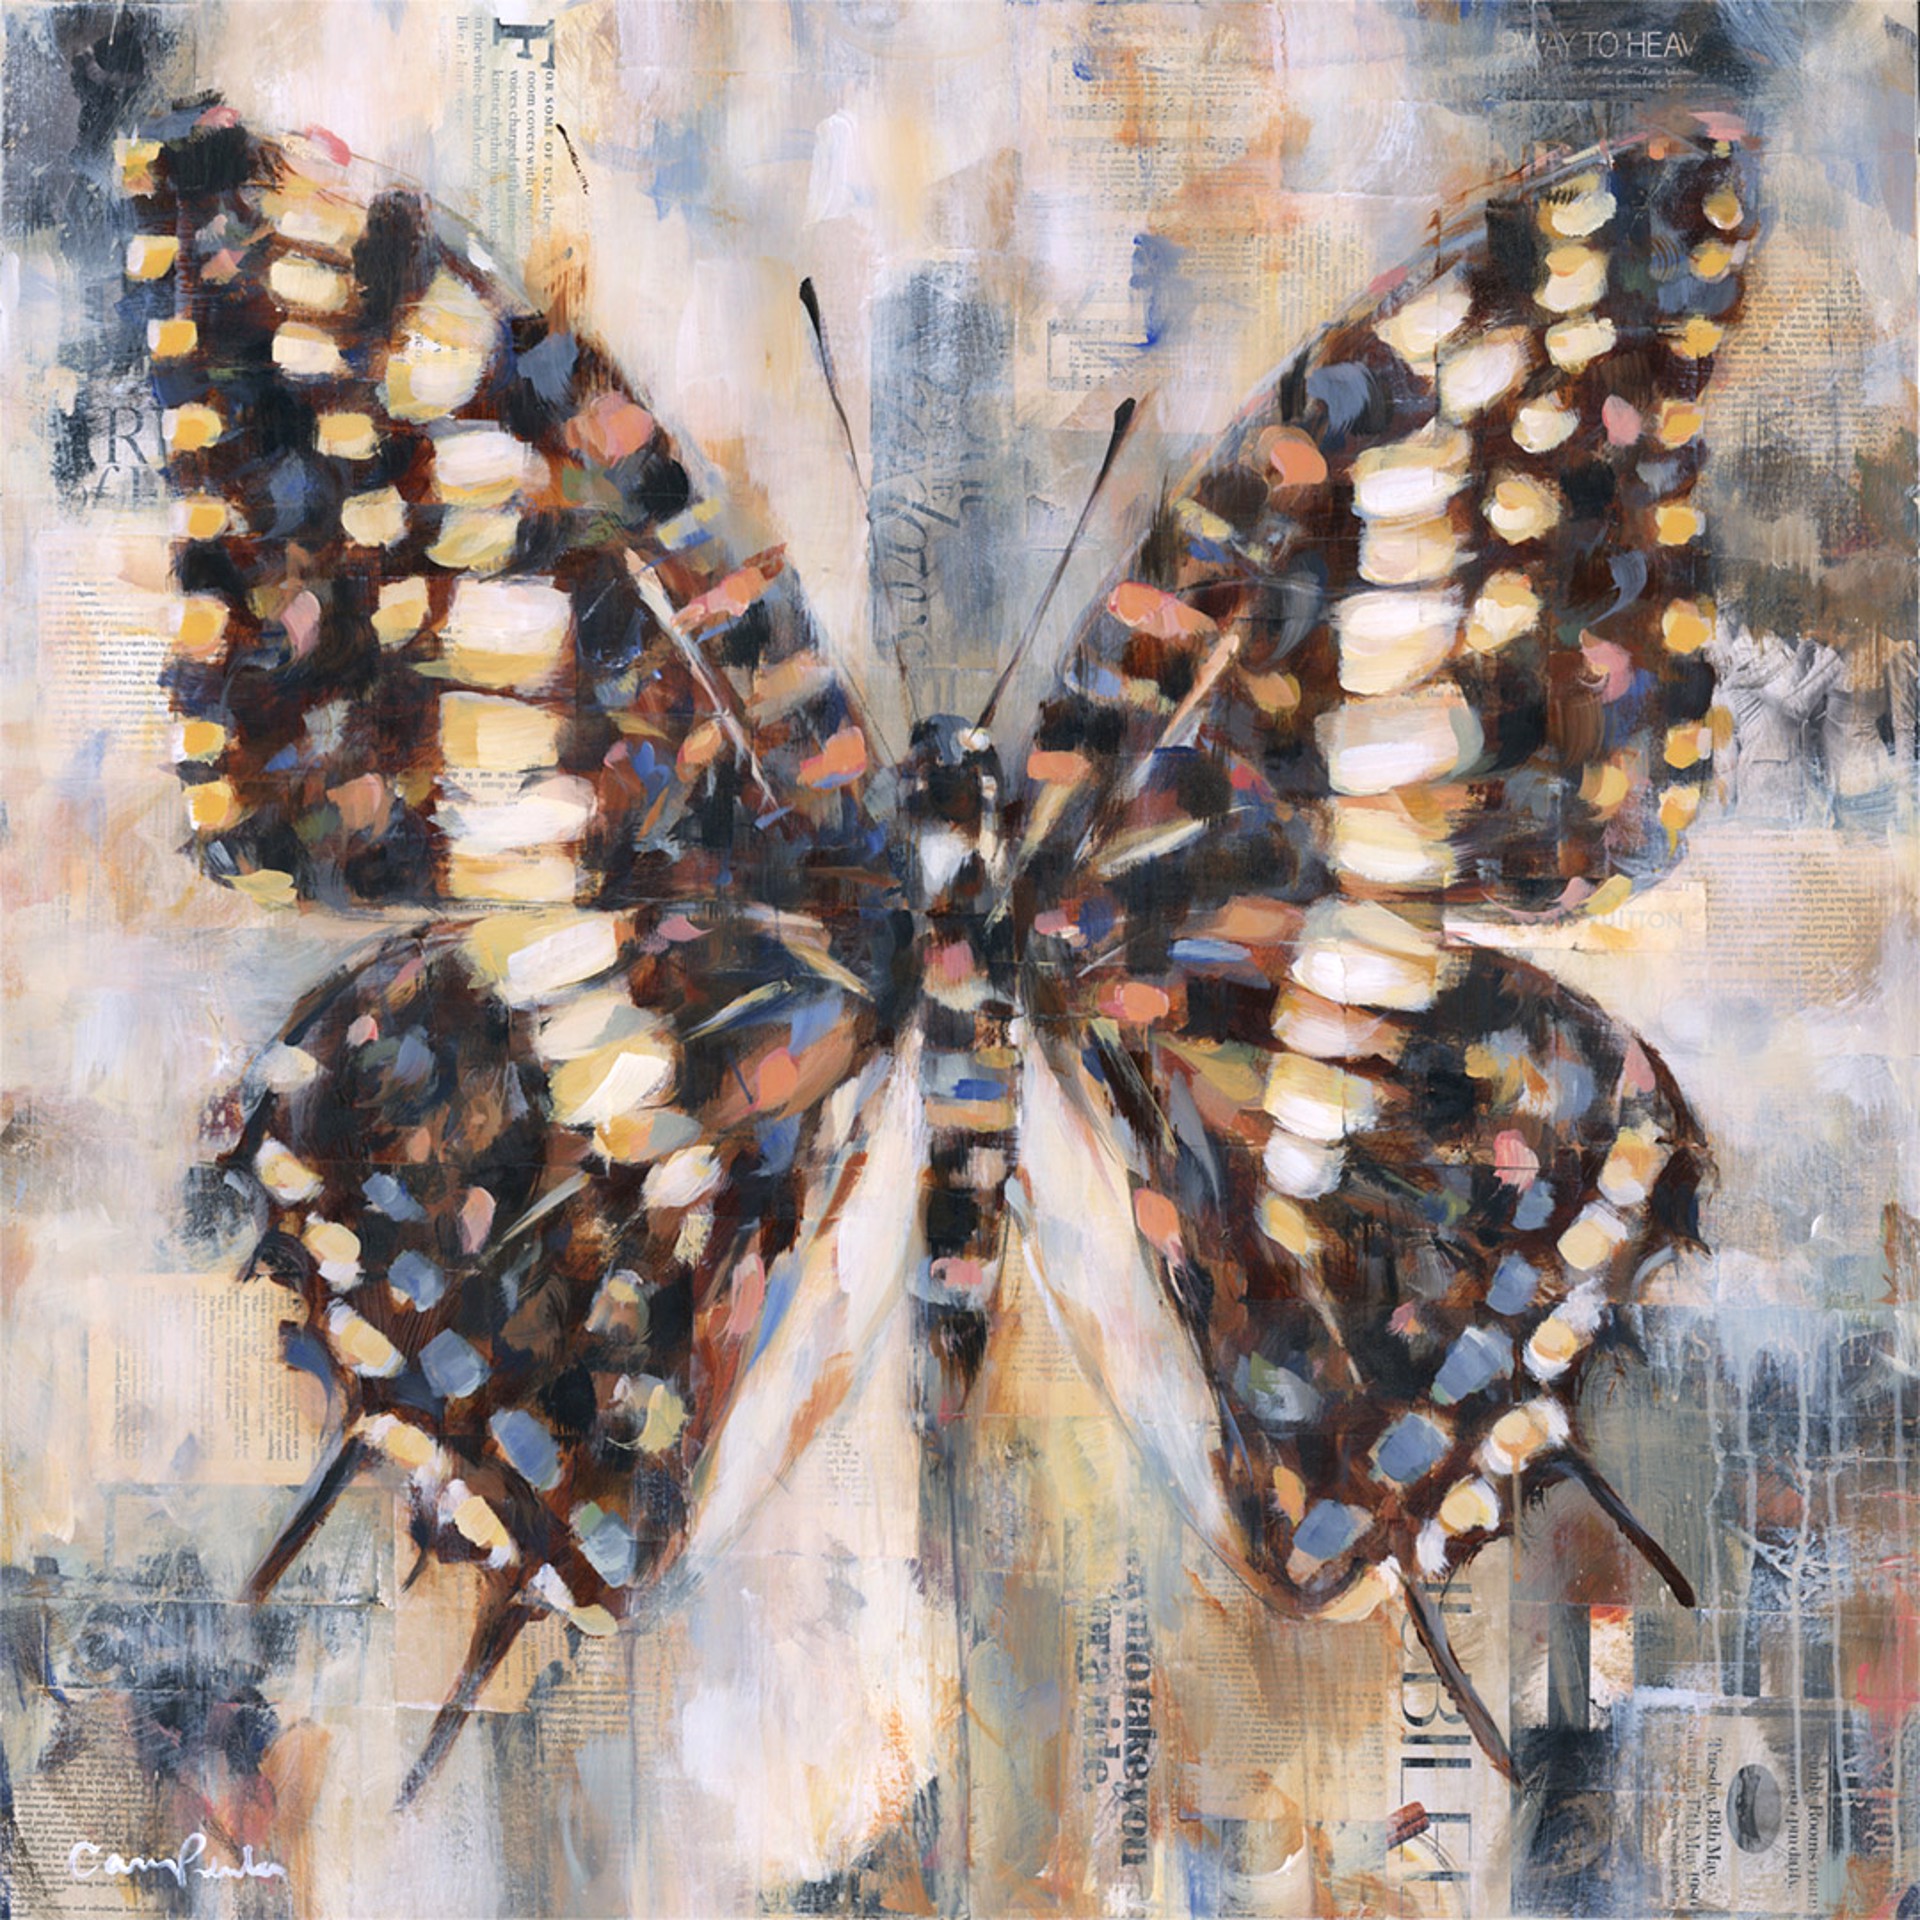 Original Mixed Media Painting By Carrie Penley Featuring A Butterfly With Vintage Collage Background